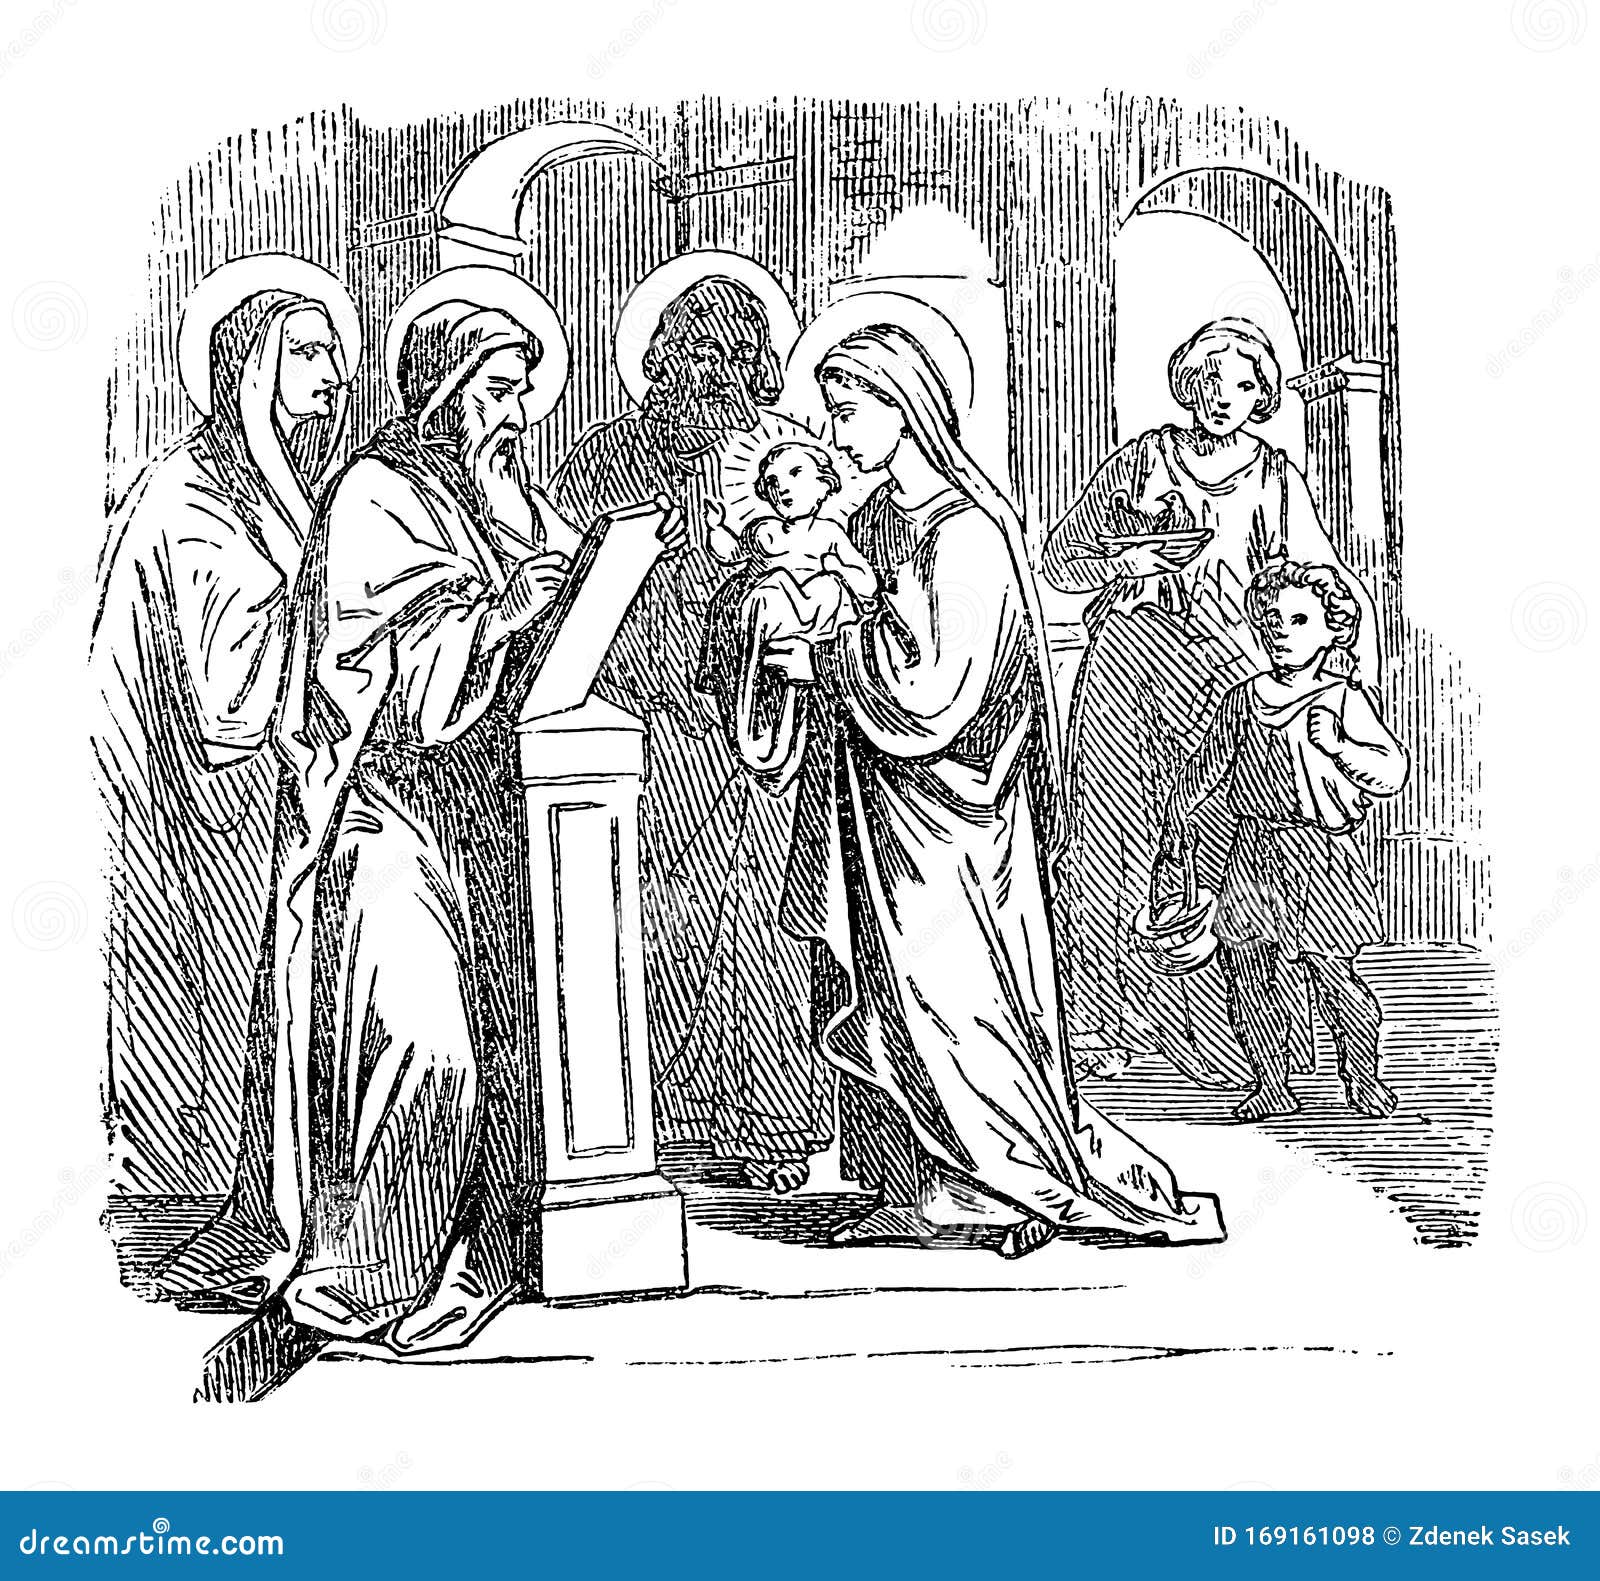 vintage drawing of biblical story of baby jesus in temple with mother mary and father saint joseph, simeon and anna